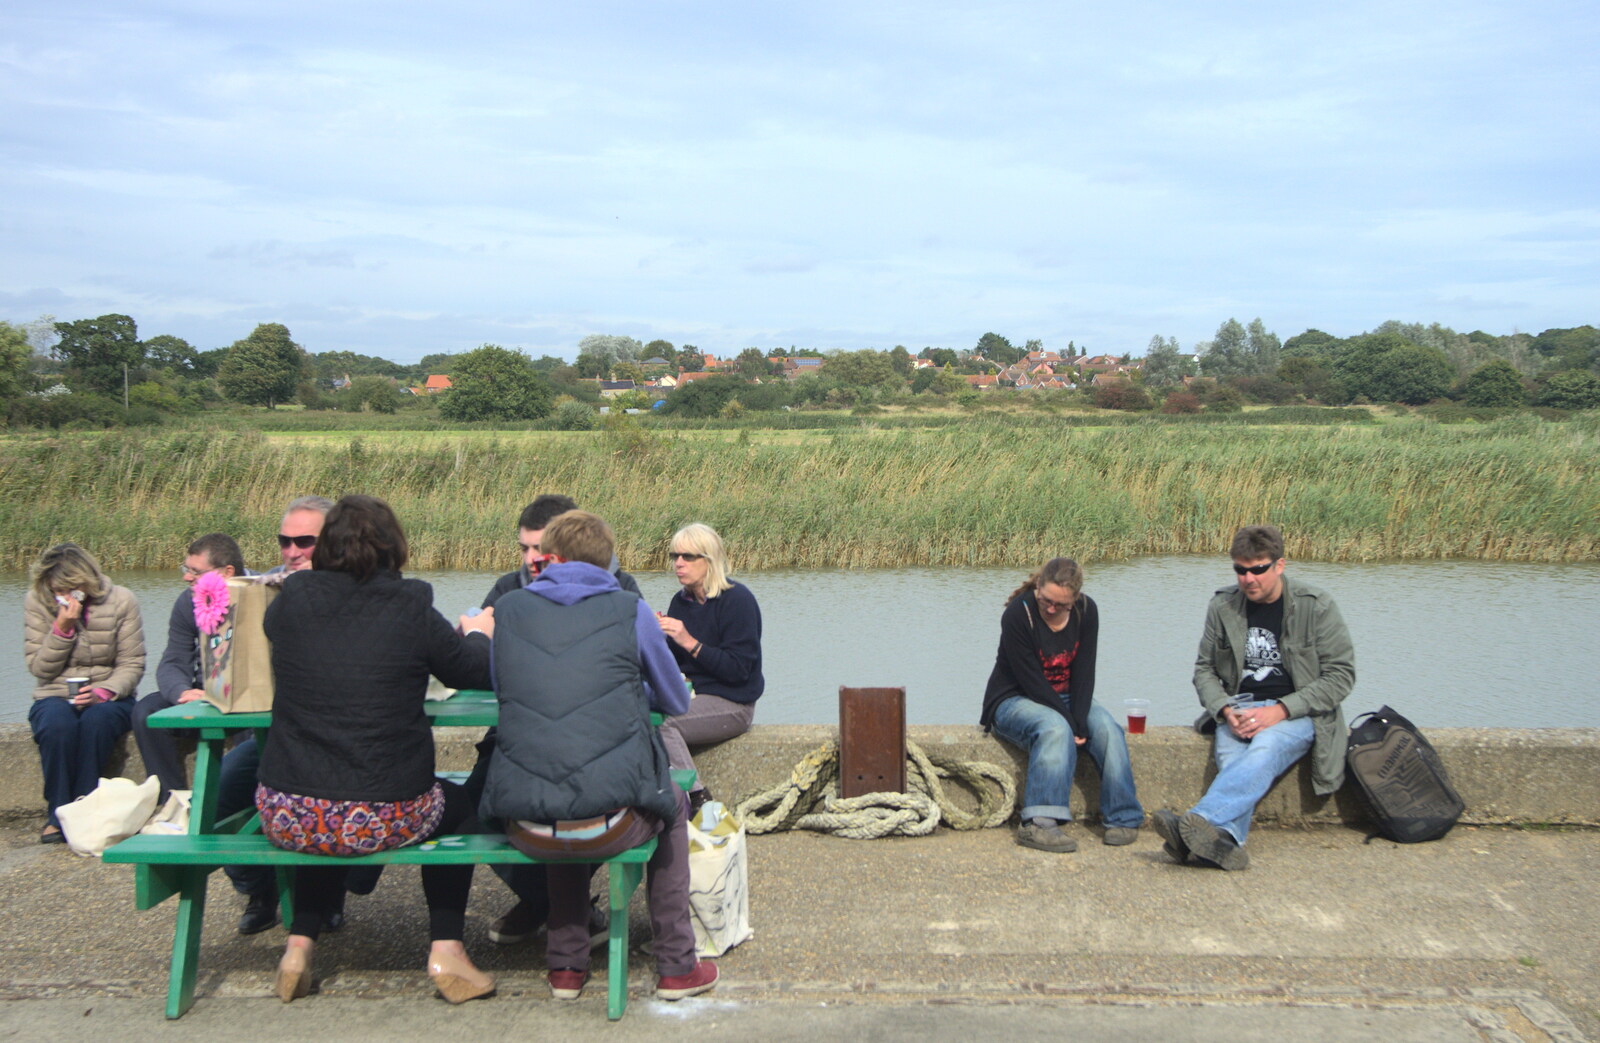 Sitting out by the River Alde from The Aldeburgh Food Festival, Aldeburgh, Suffolk - 30th September 2012